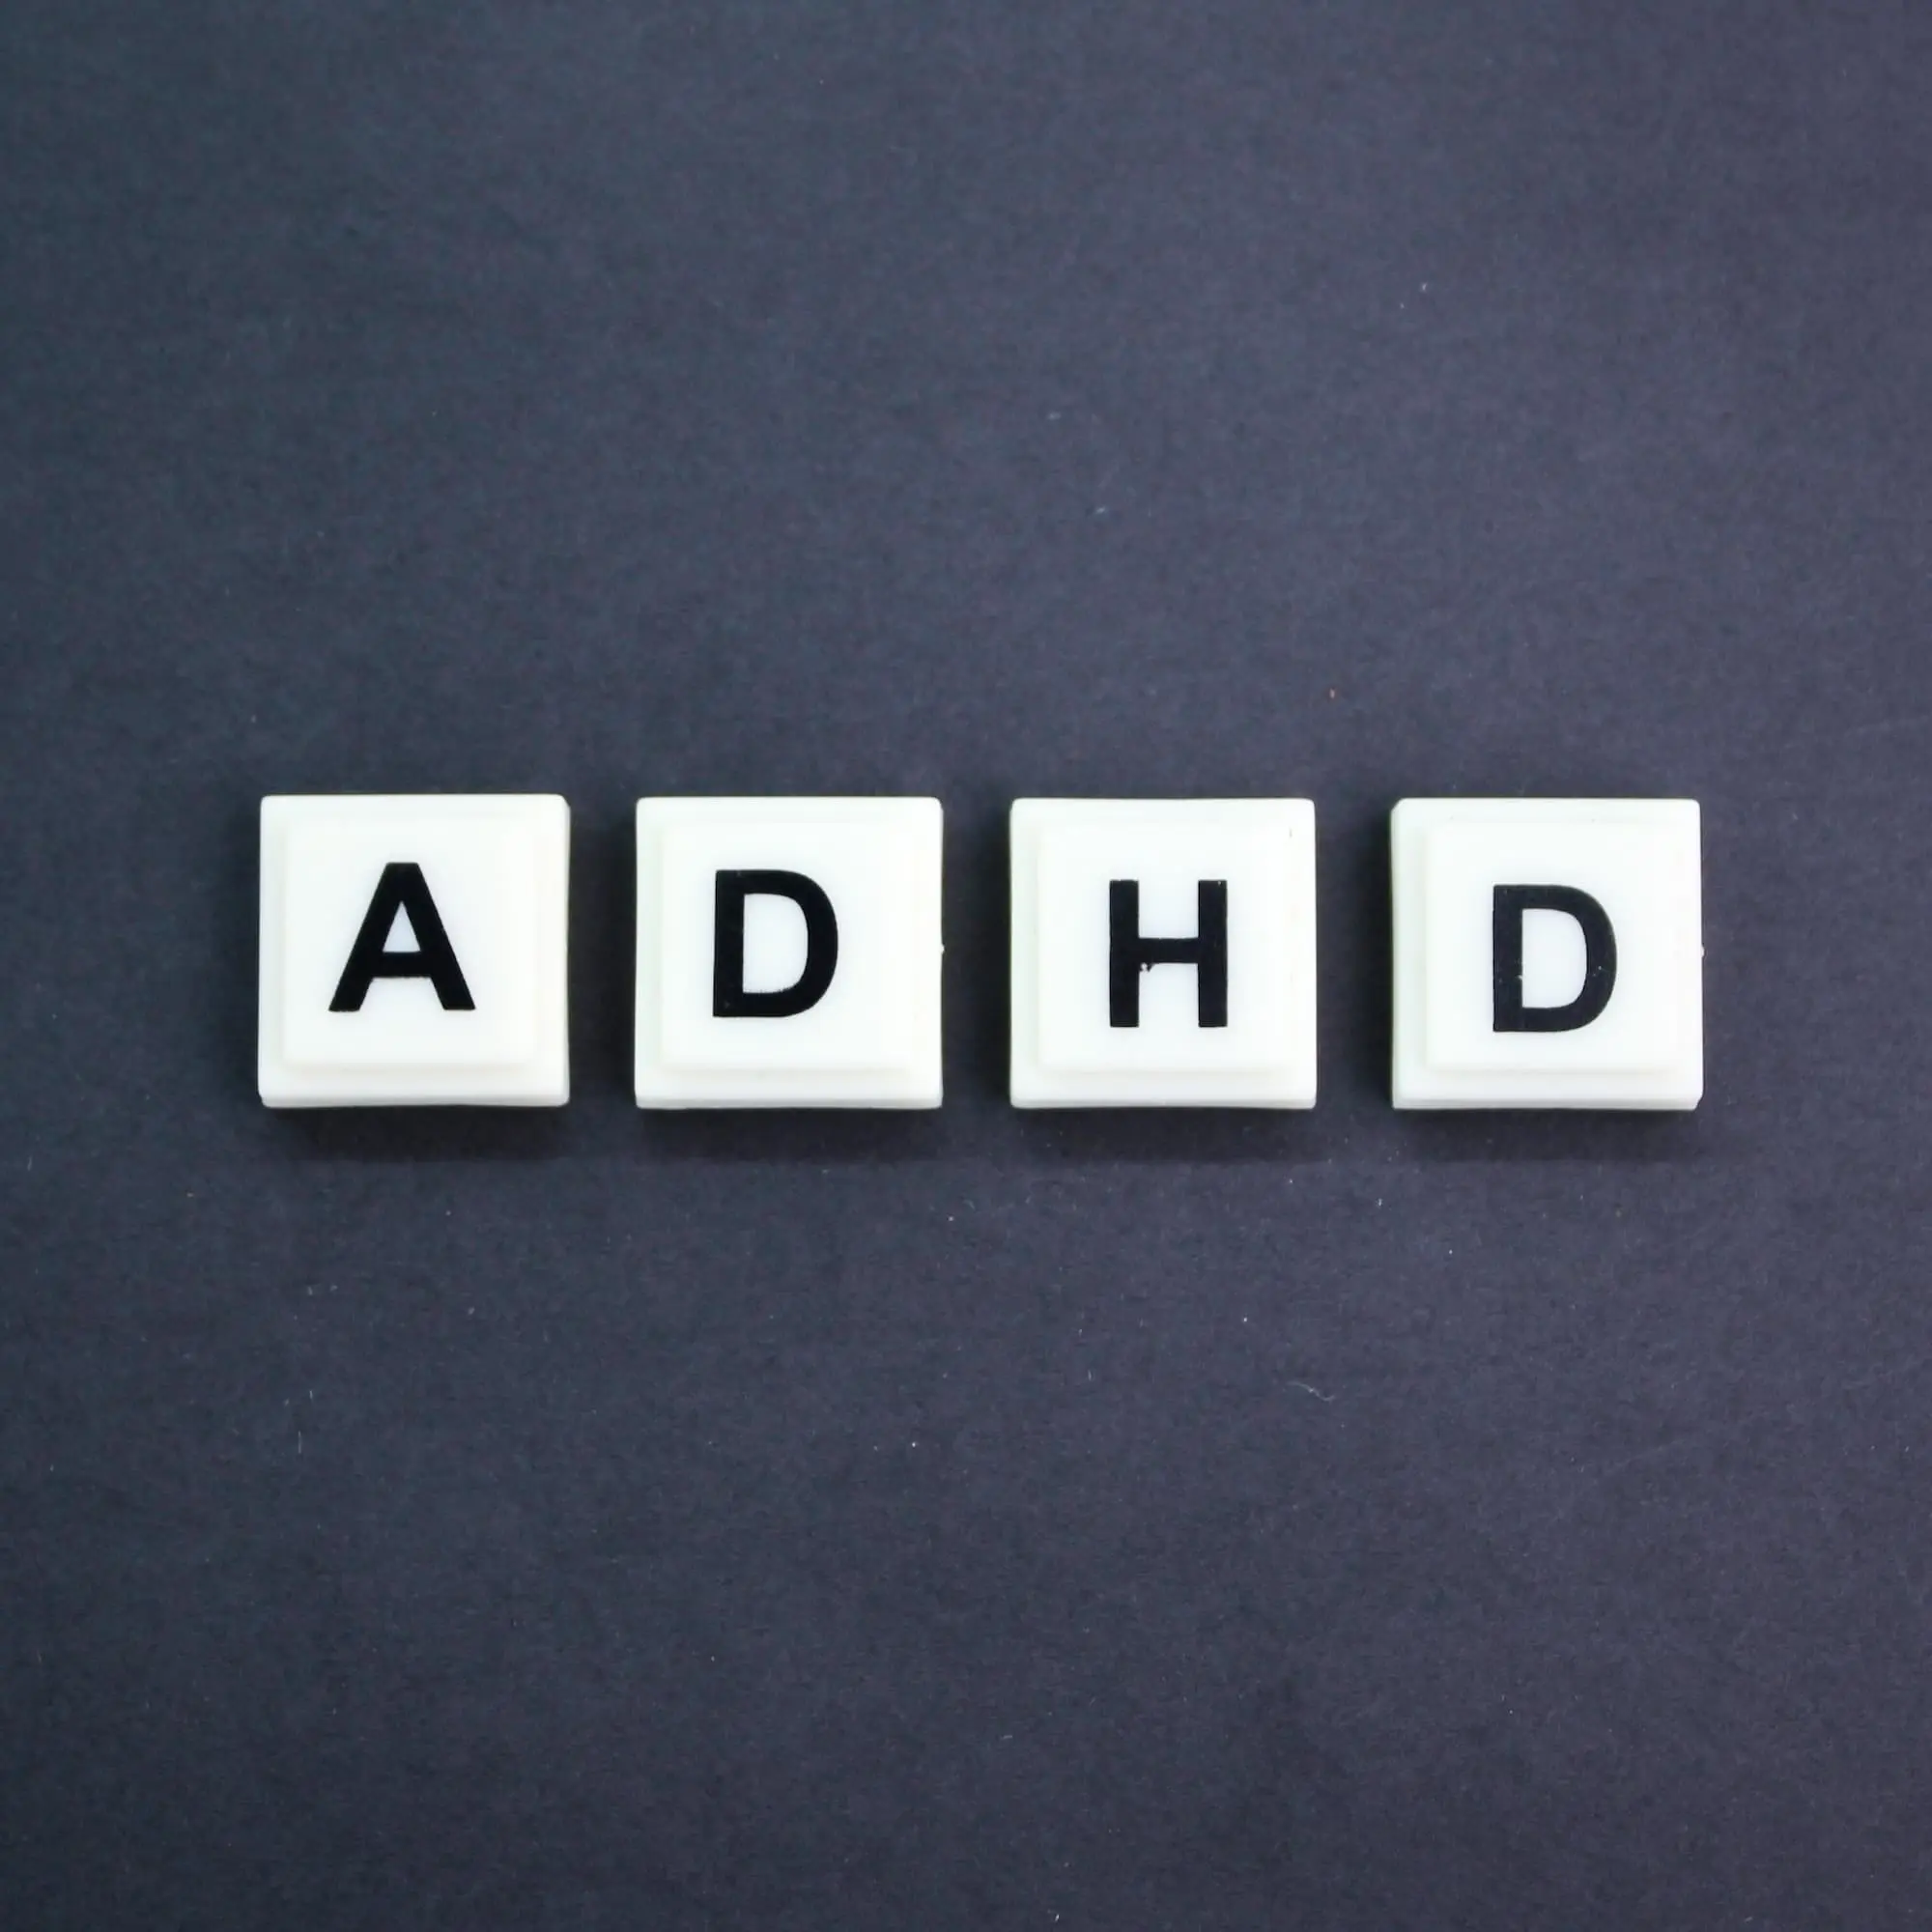 Adhd Or With The Word Attention Deficit Hyperactiv 2023 09 19 03 57 47 Utc